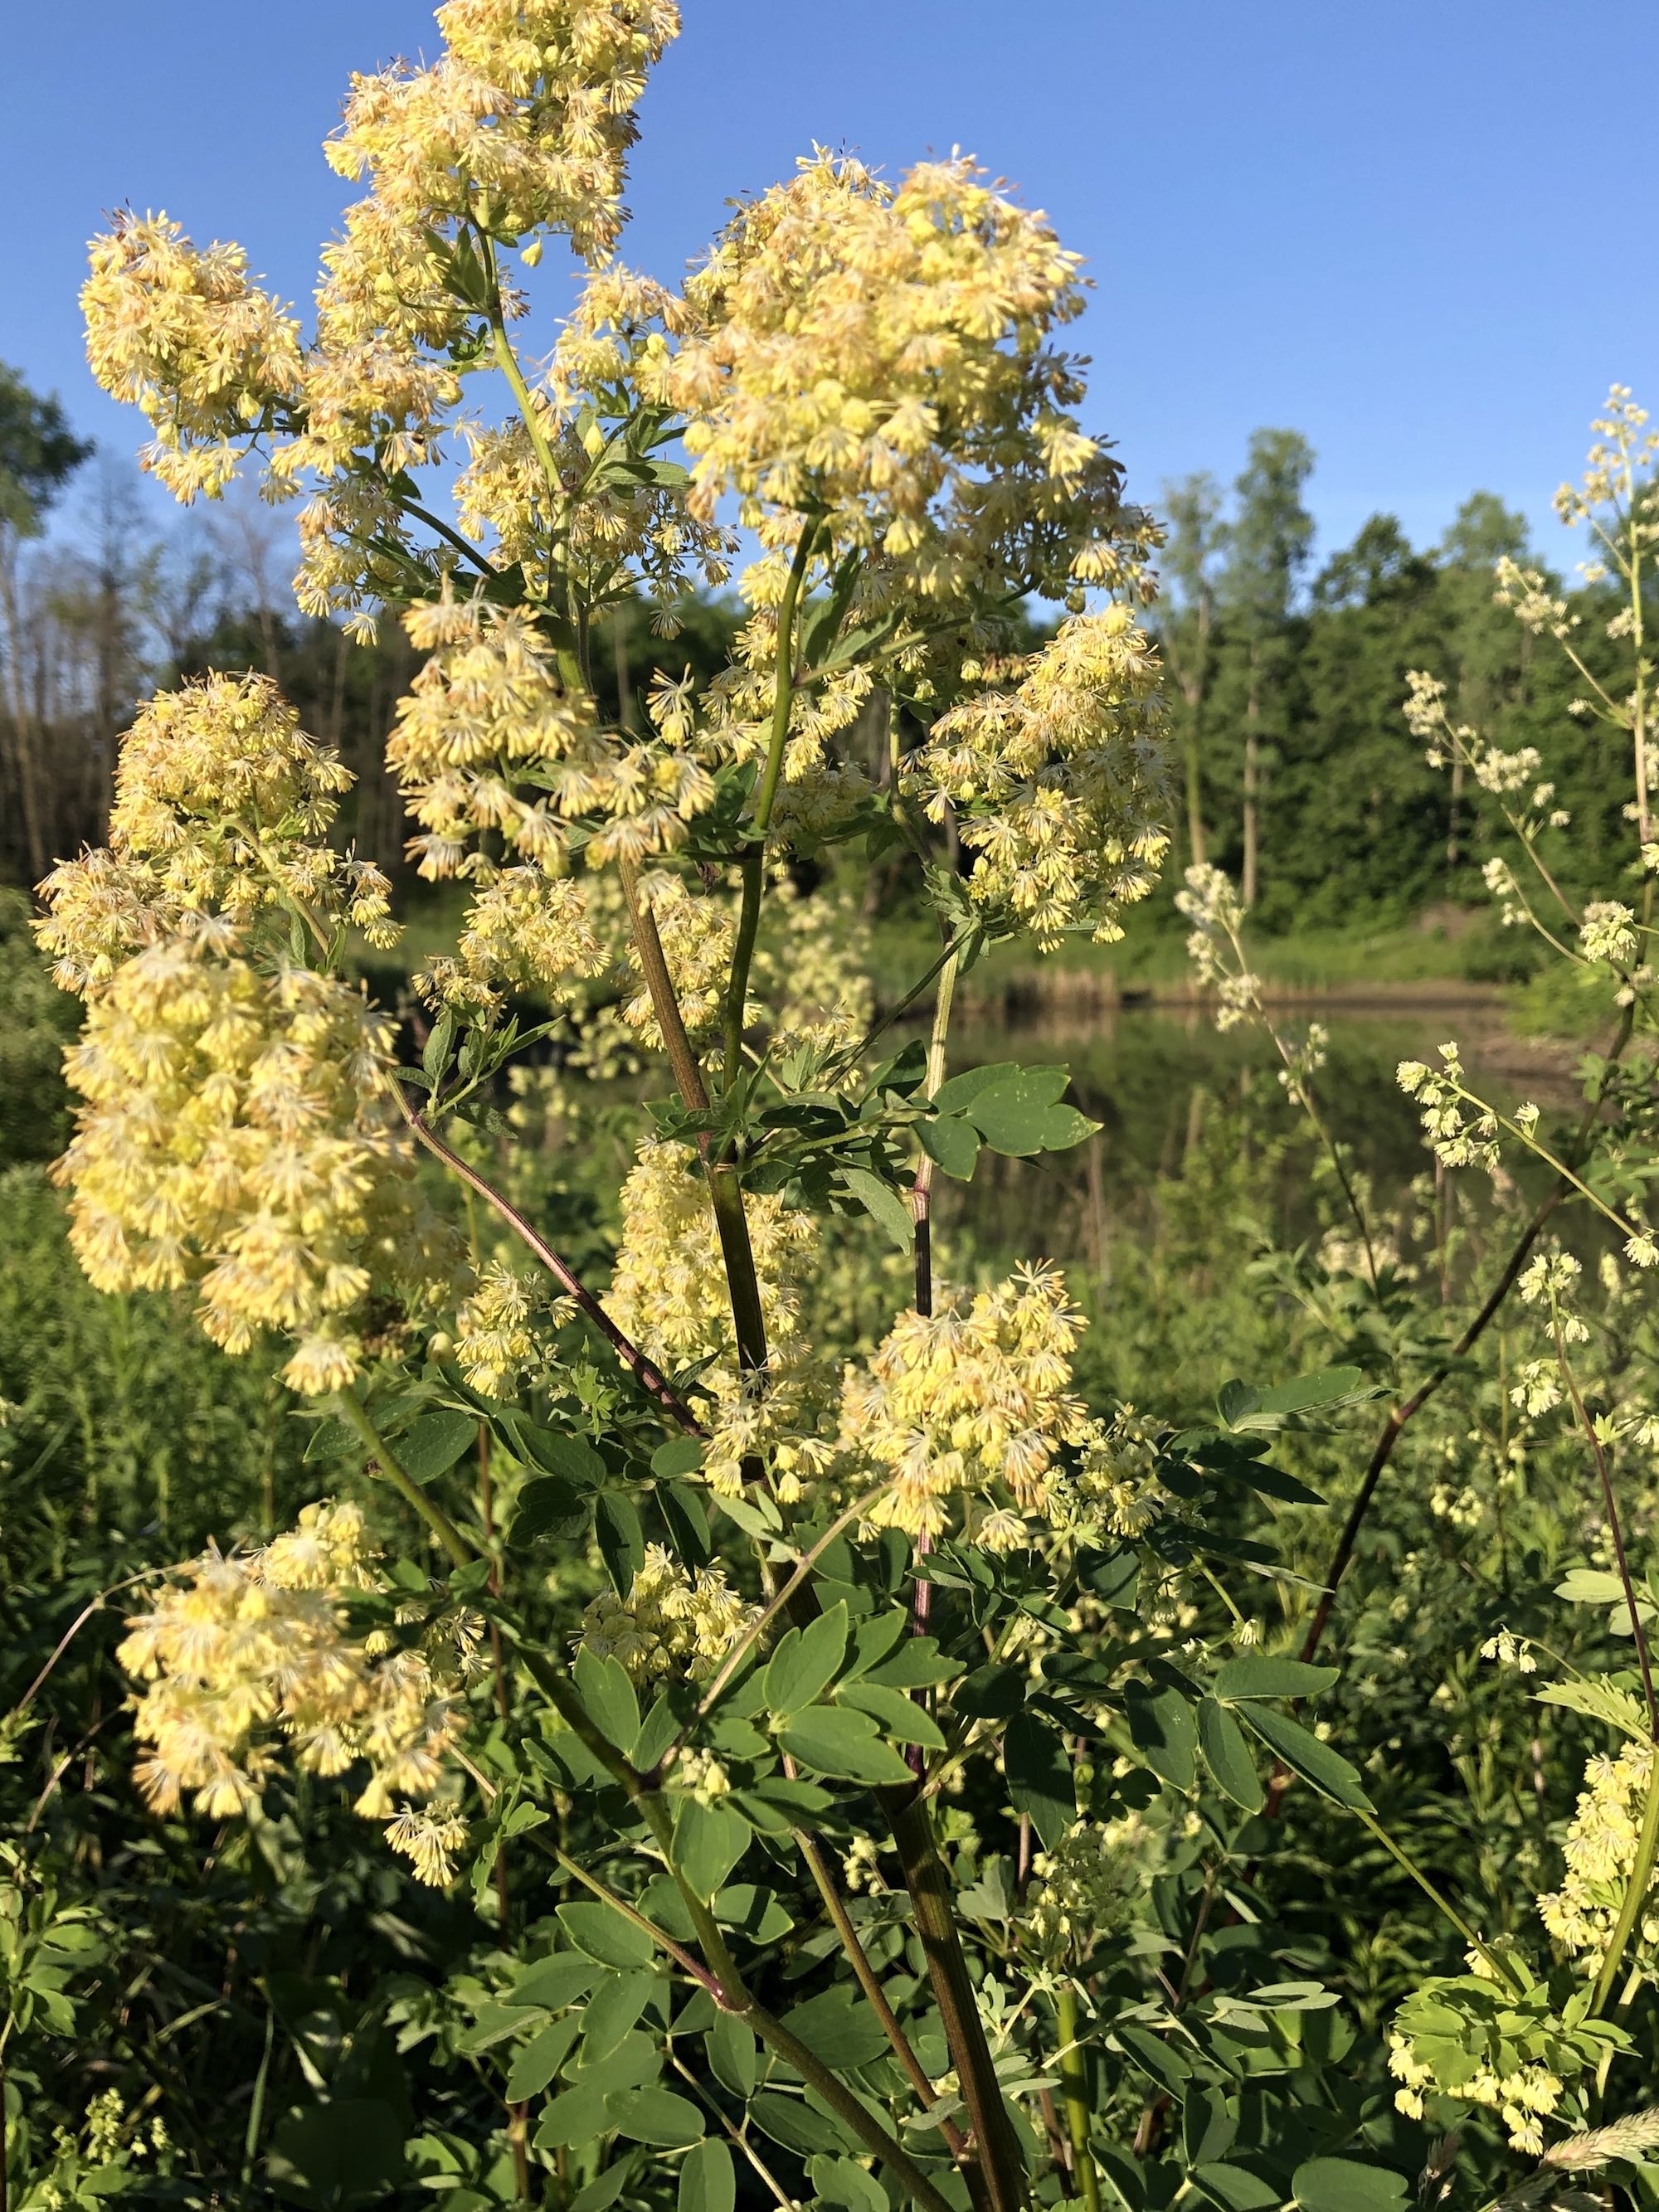 Tall Meadow-rue on shore of Marion Dunn Pond on June 16, 2020.